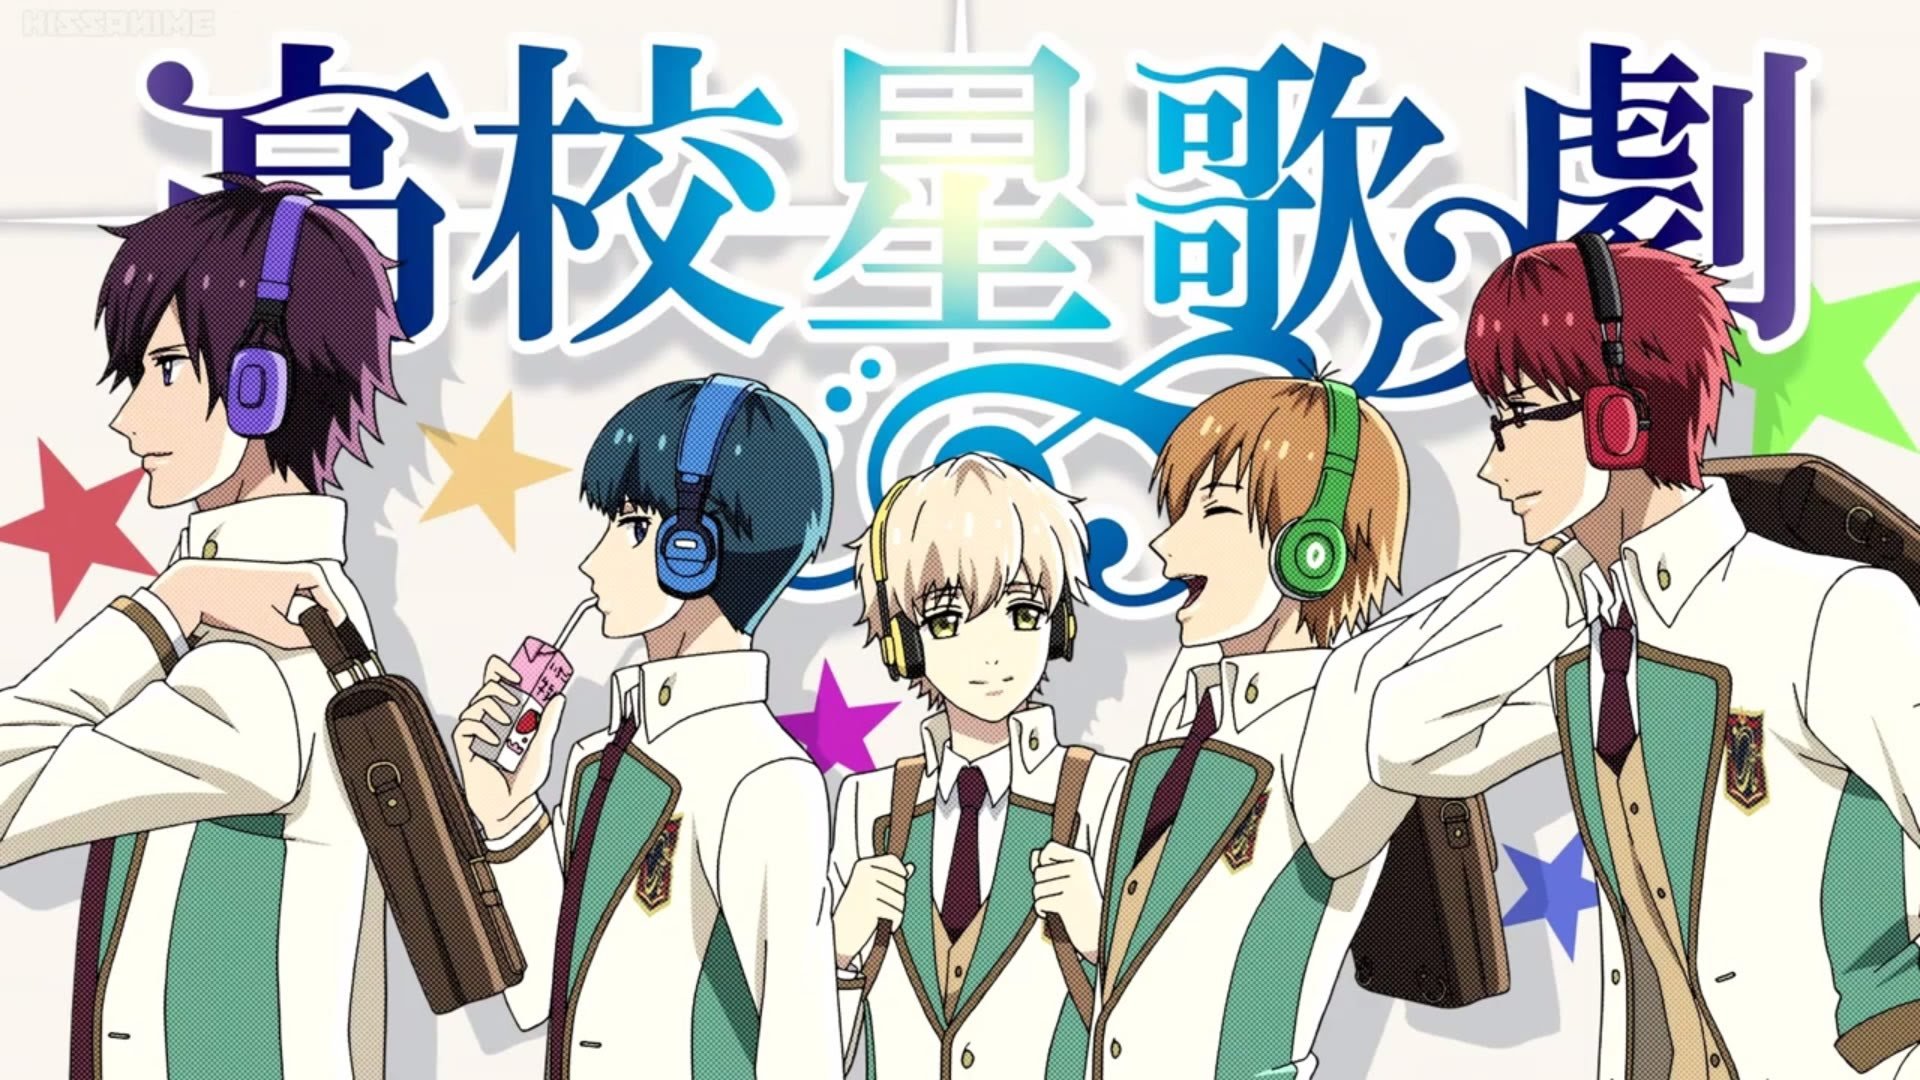 Starmyu S1 Sub Indo Episode 01-12 End